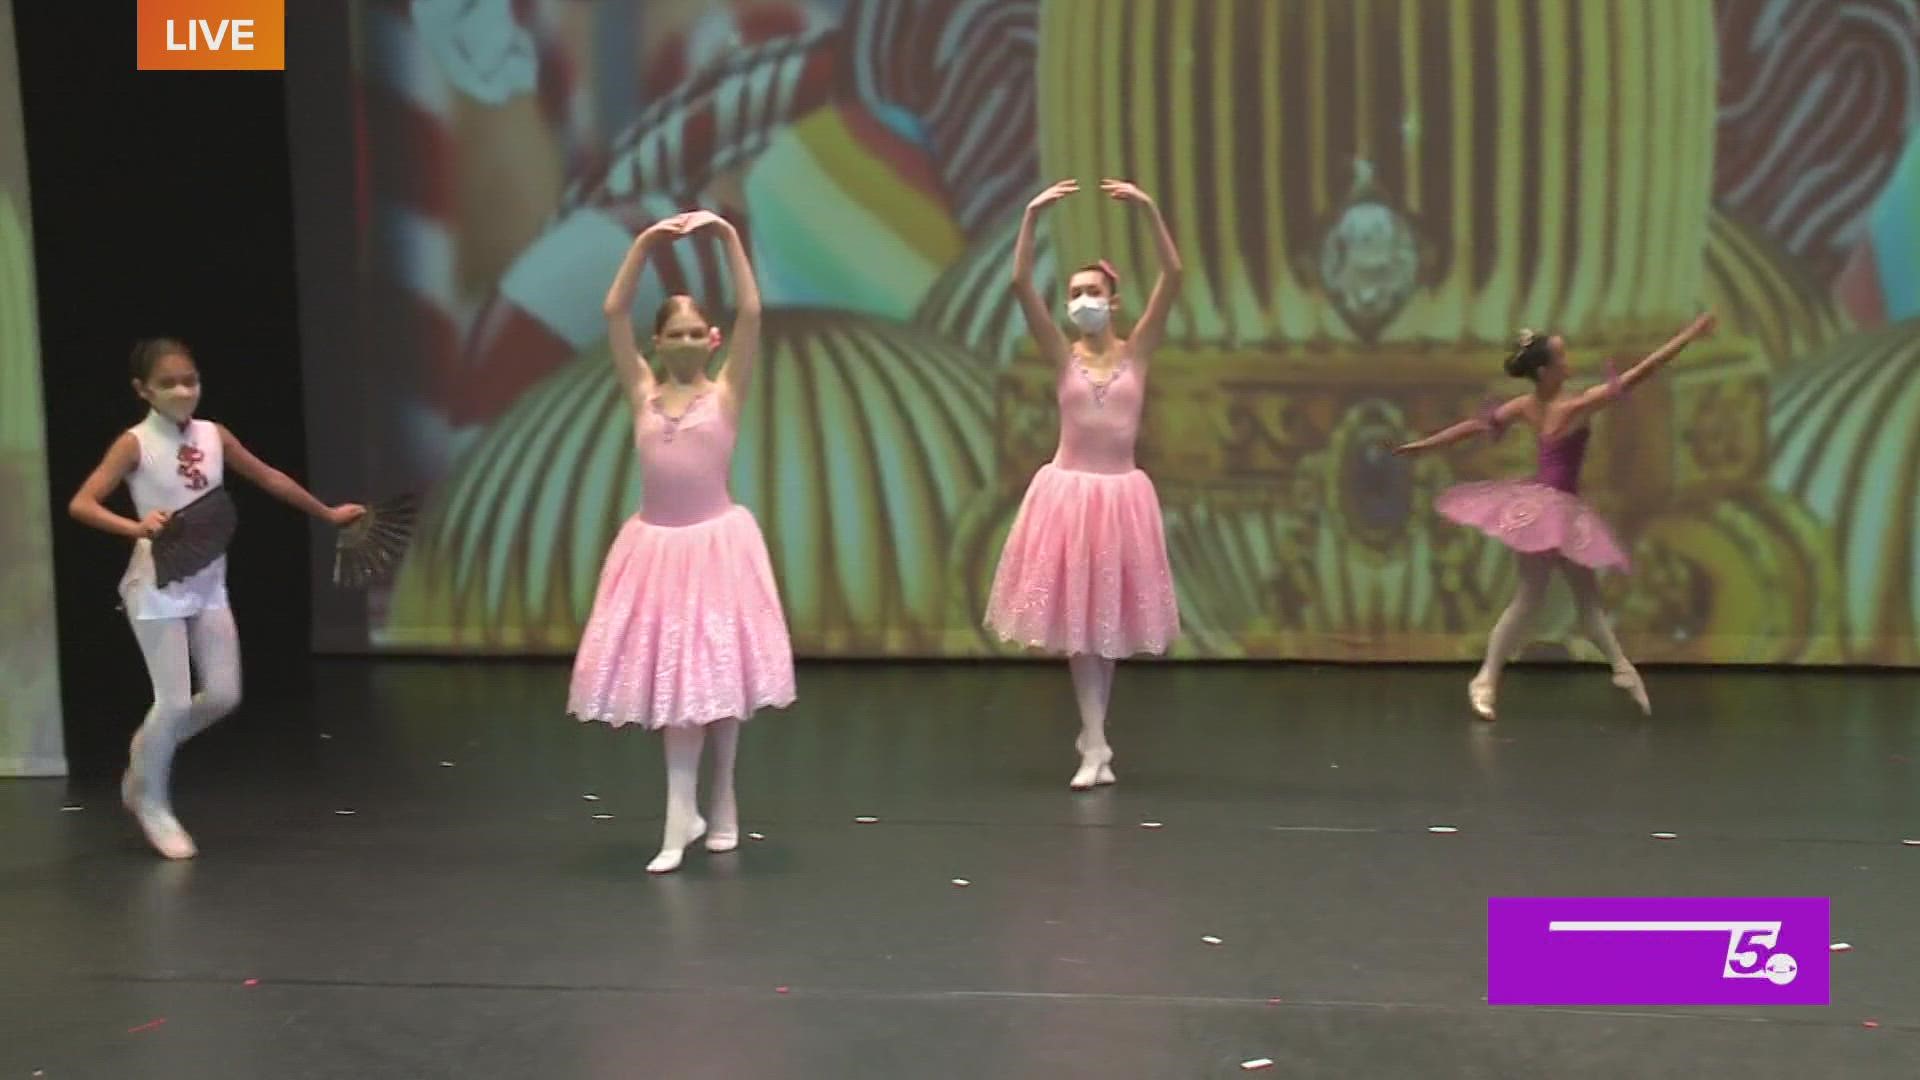 The award-winning Children's Ballet of San Antonio is putting on the Nutcracker the weekend of December 10 and 11 at the Lila Cockrell Theatre.